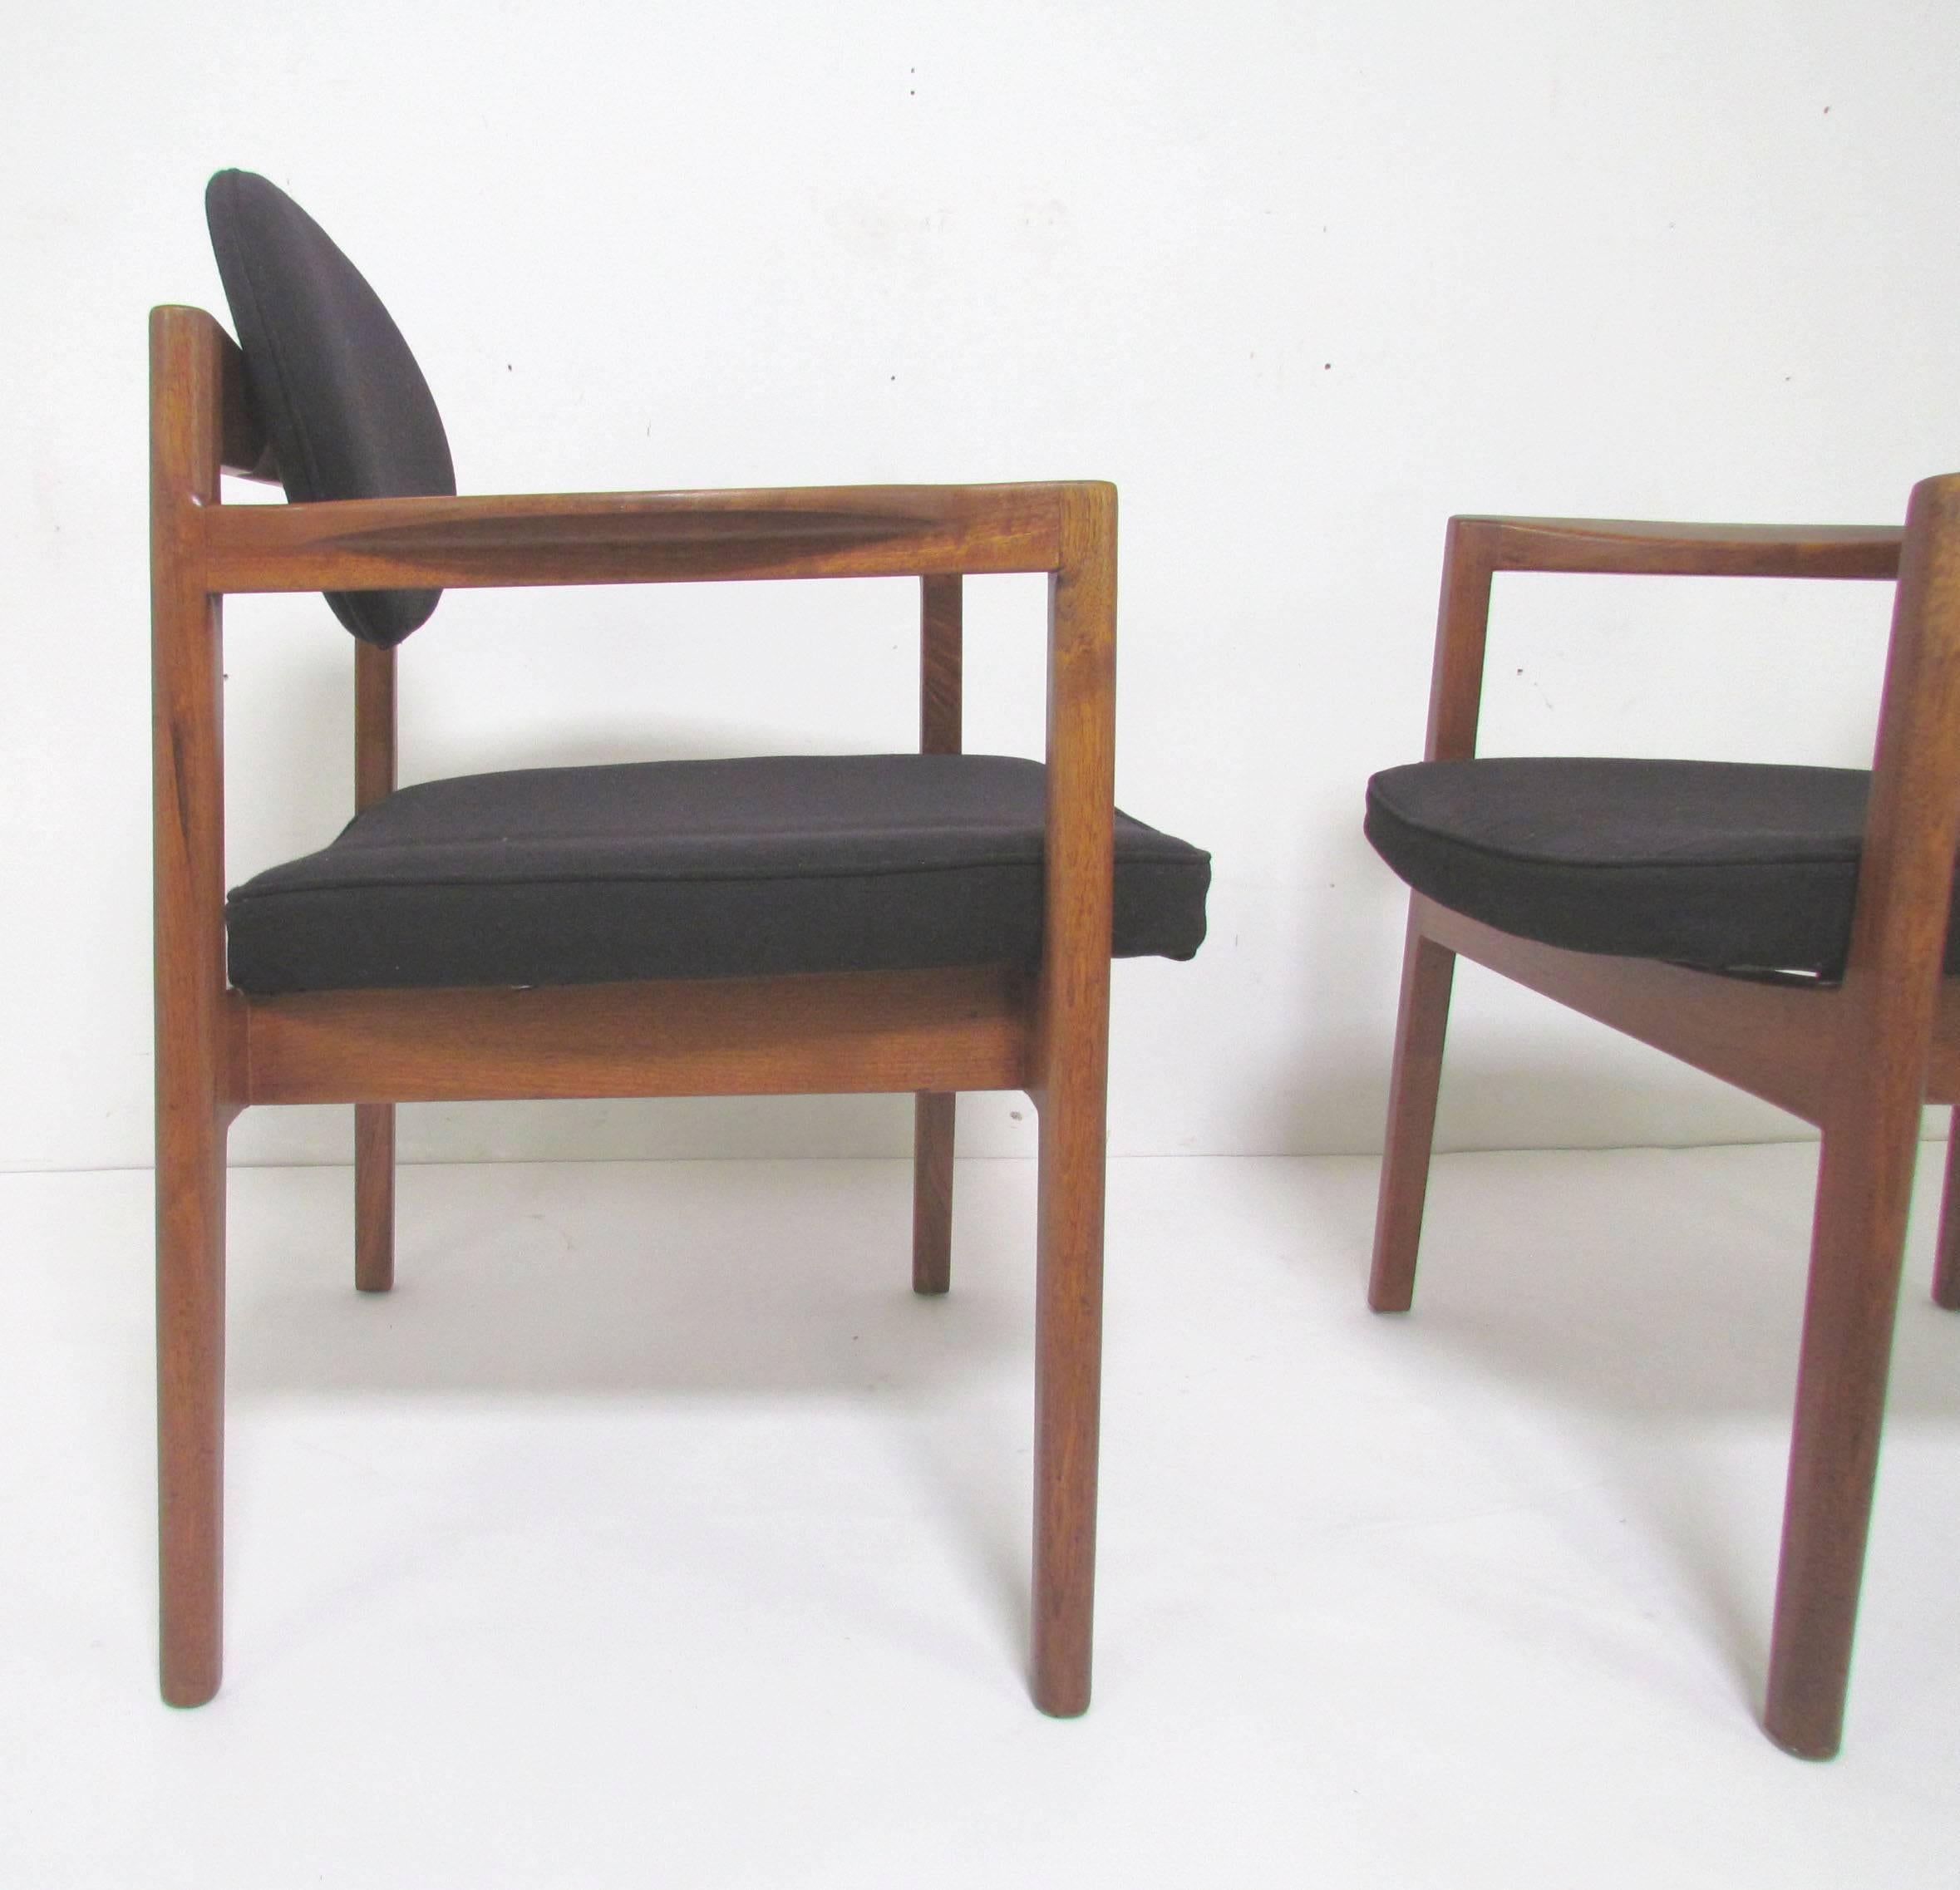 Pair of armchairs in solid walnut, circa 1960s. This model is often attributed as the work of Jens Risom. Note, we have a second pair available in the same original upholstery, sold separately. All four were used by the prior owner as dining chairs